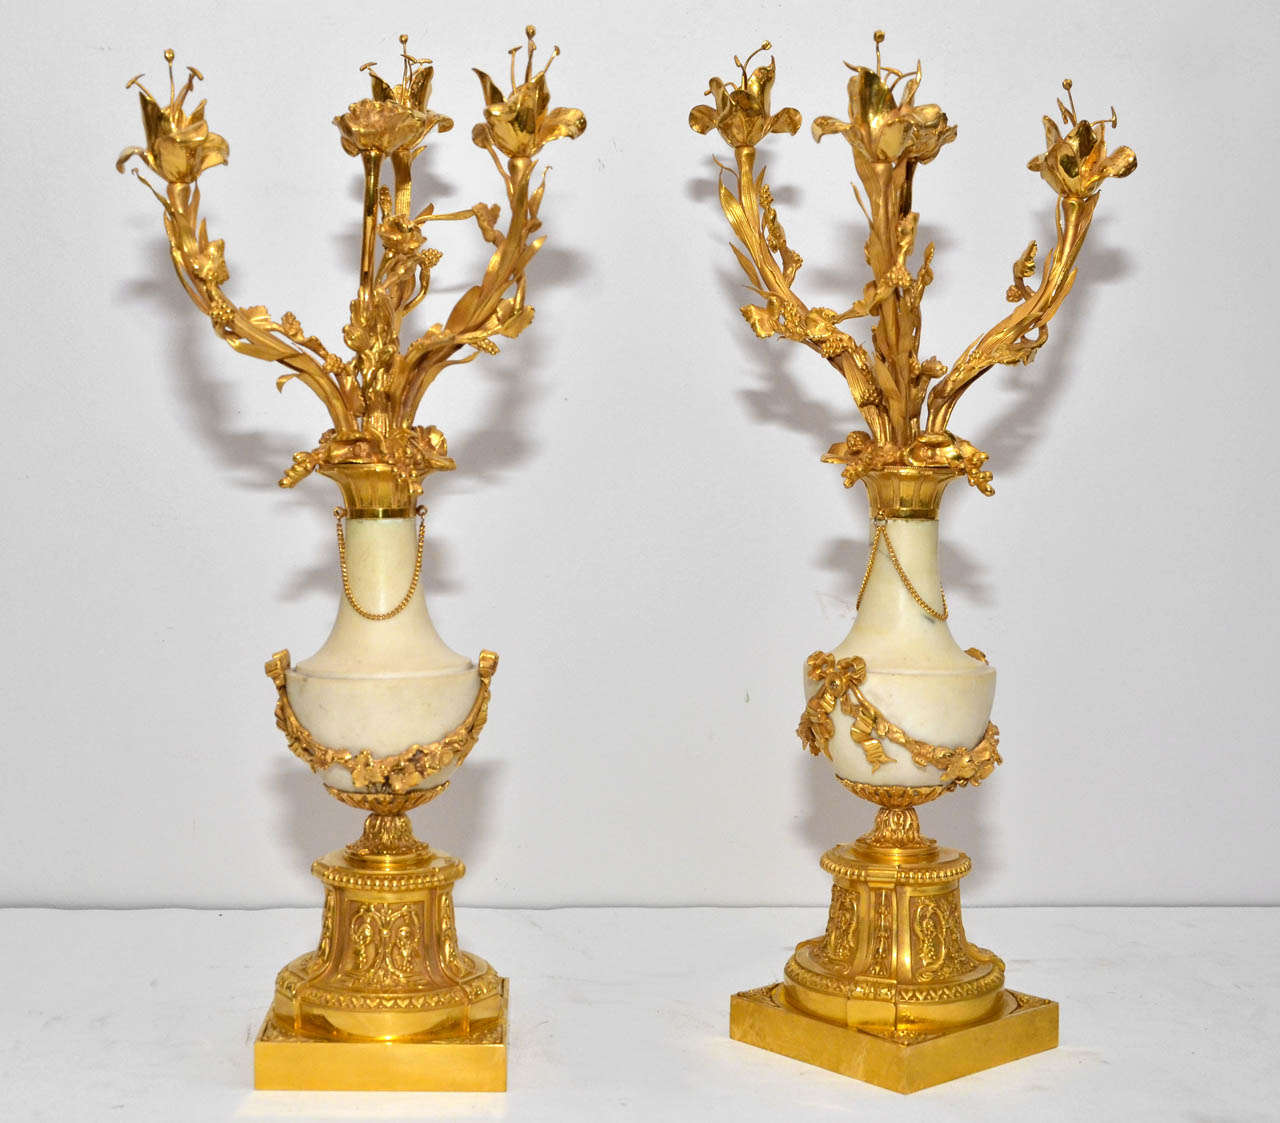 gorgeous pair of candalabras, marble vases holding 4 arms of lights.
Vases resting on gilded bronze base